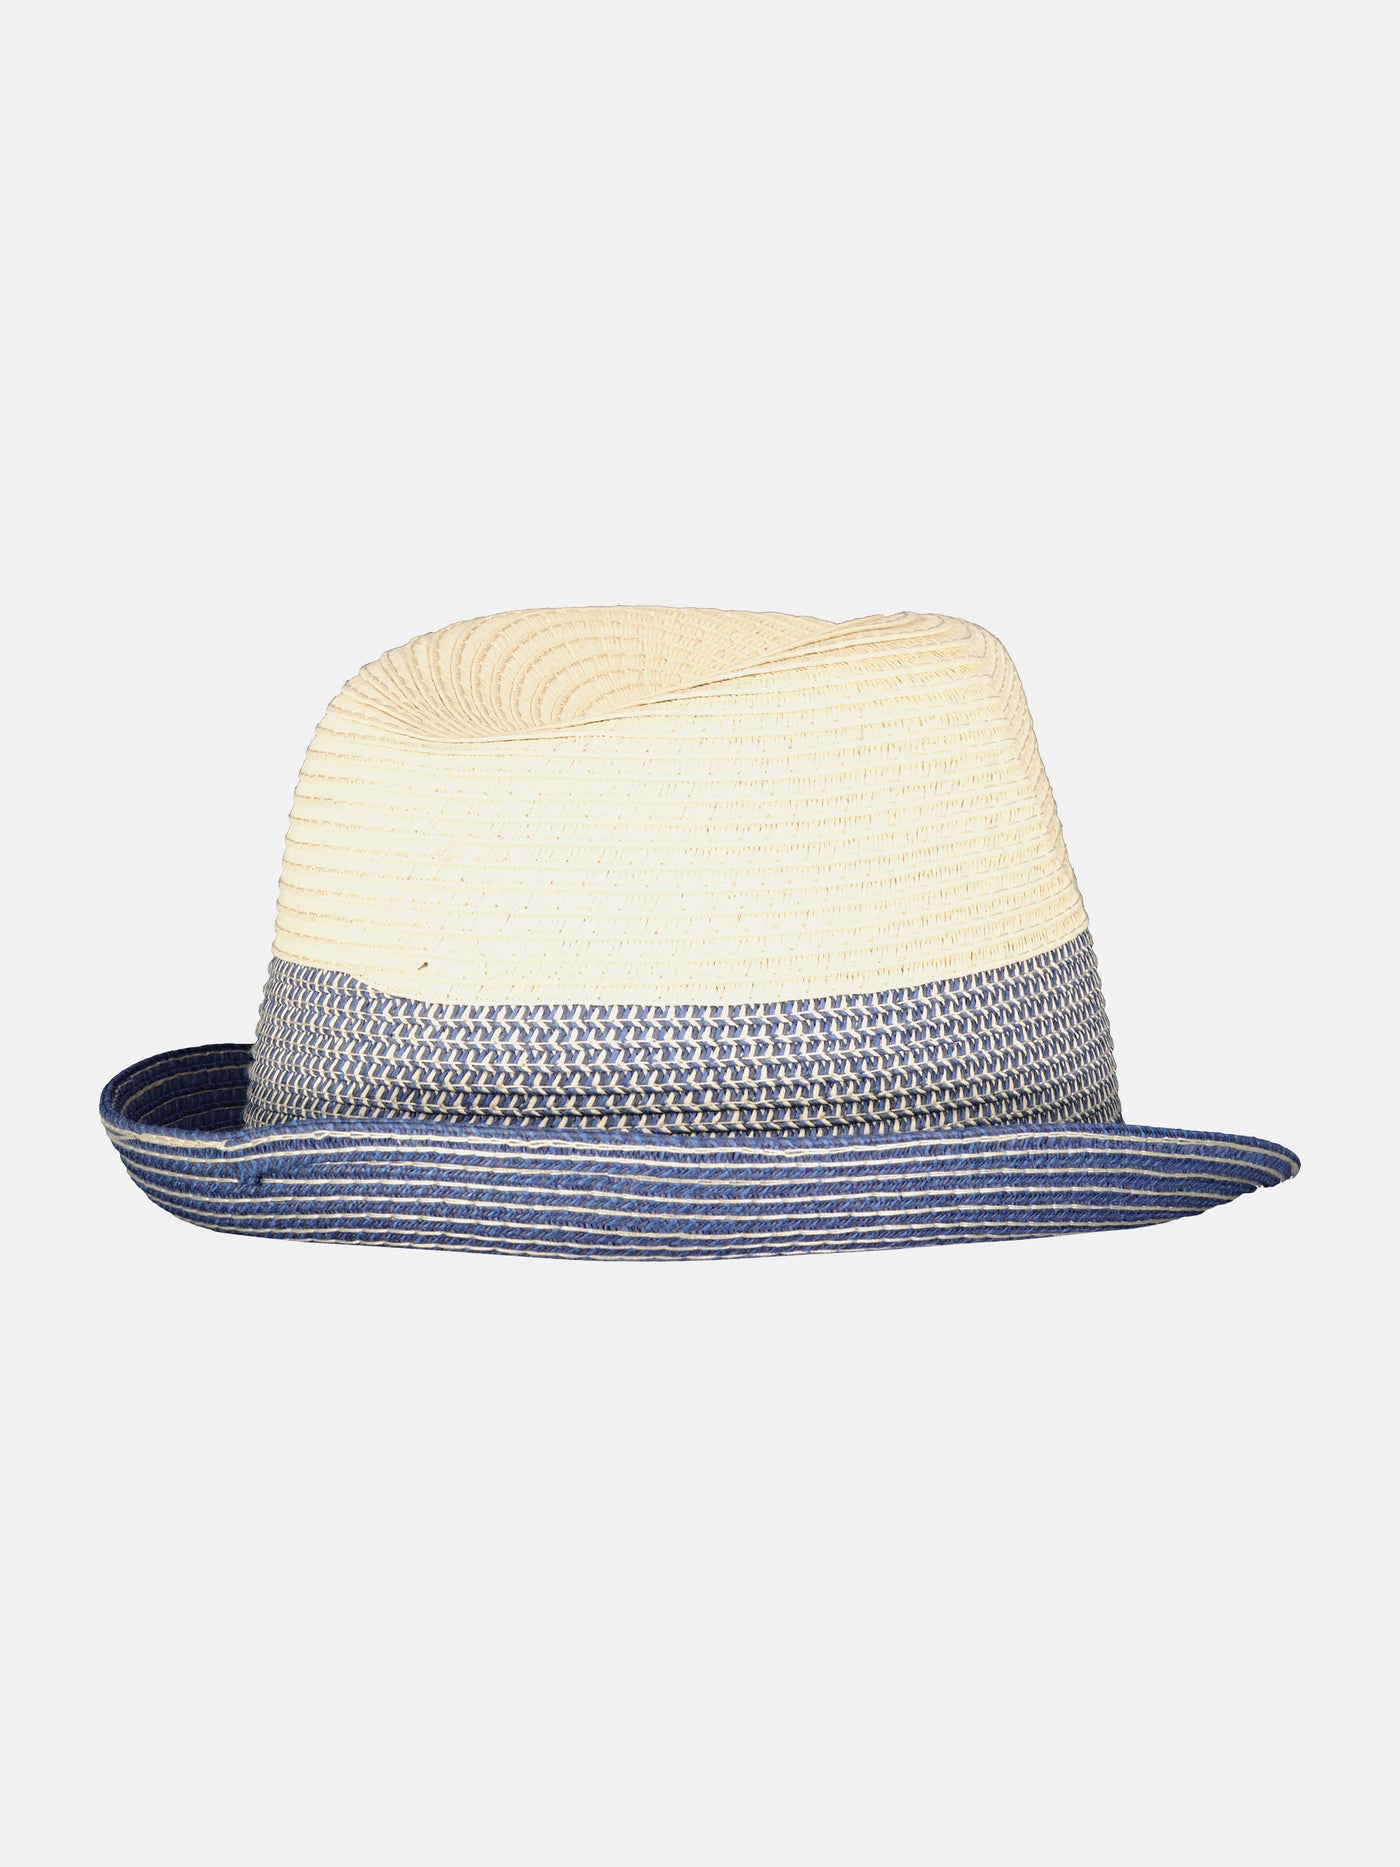 Straw hat with colored brim